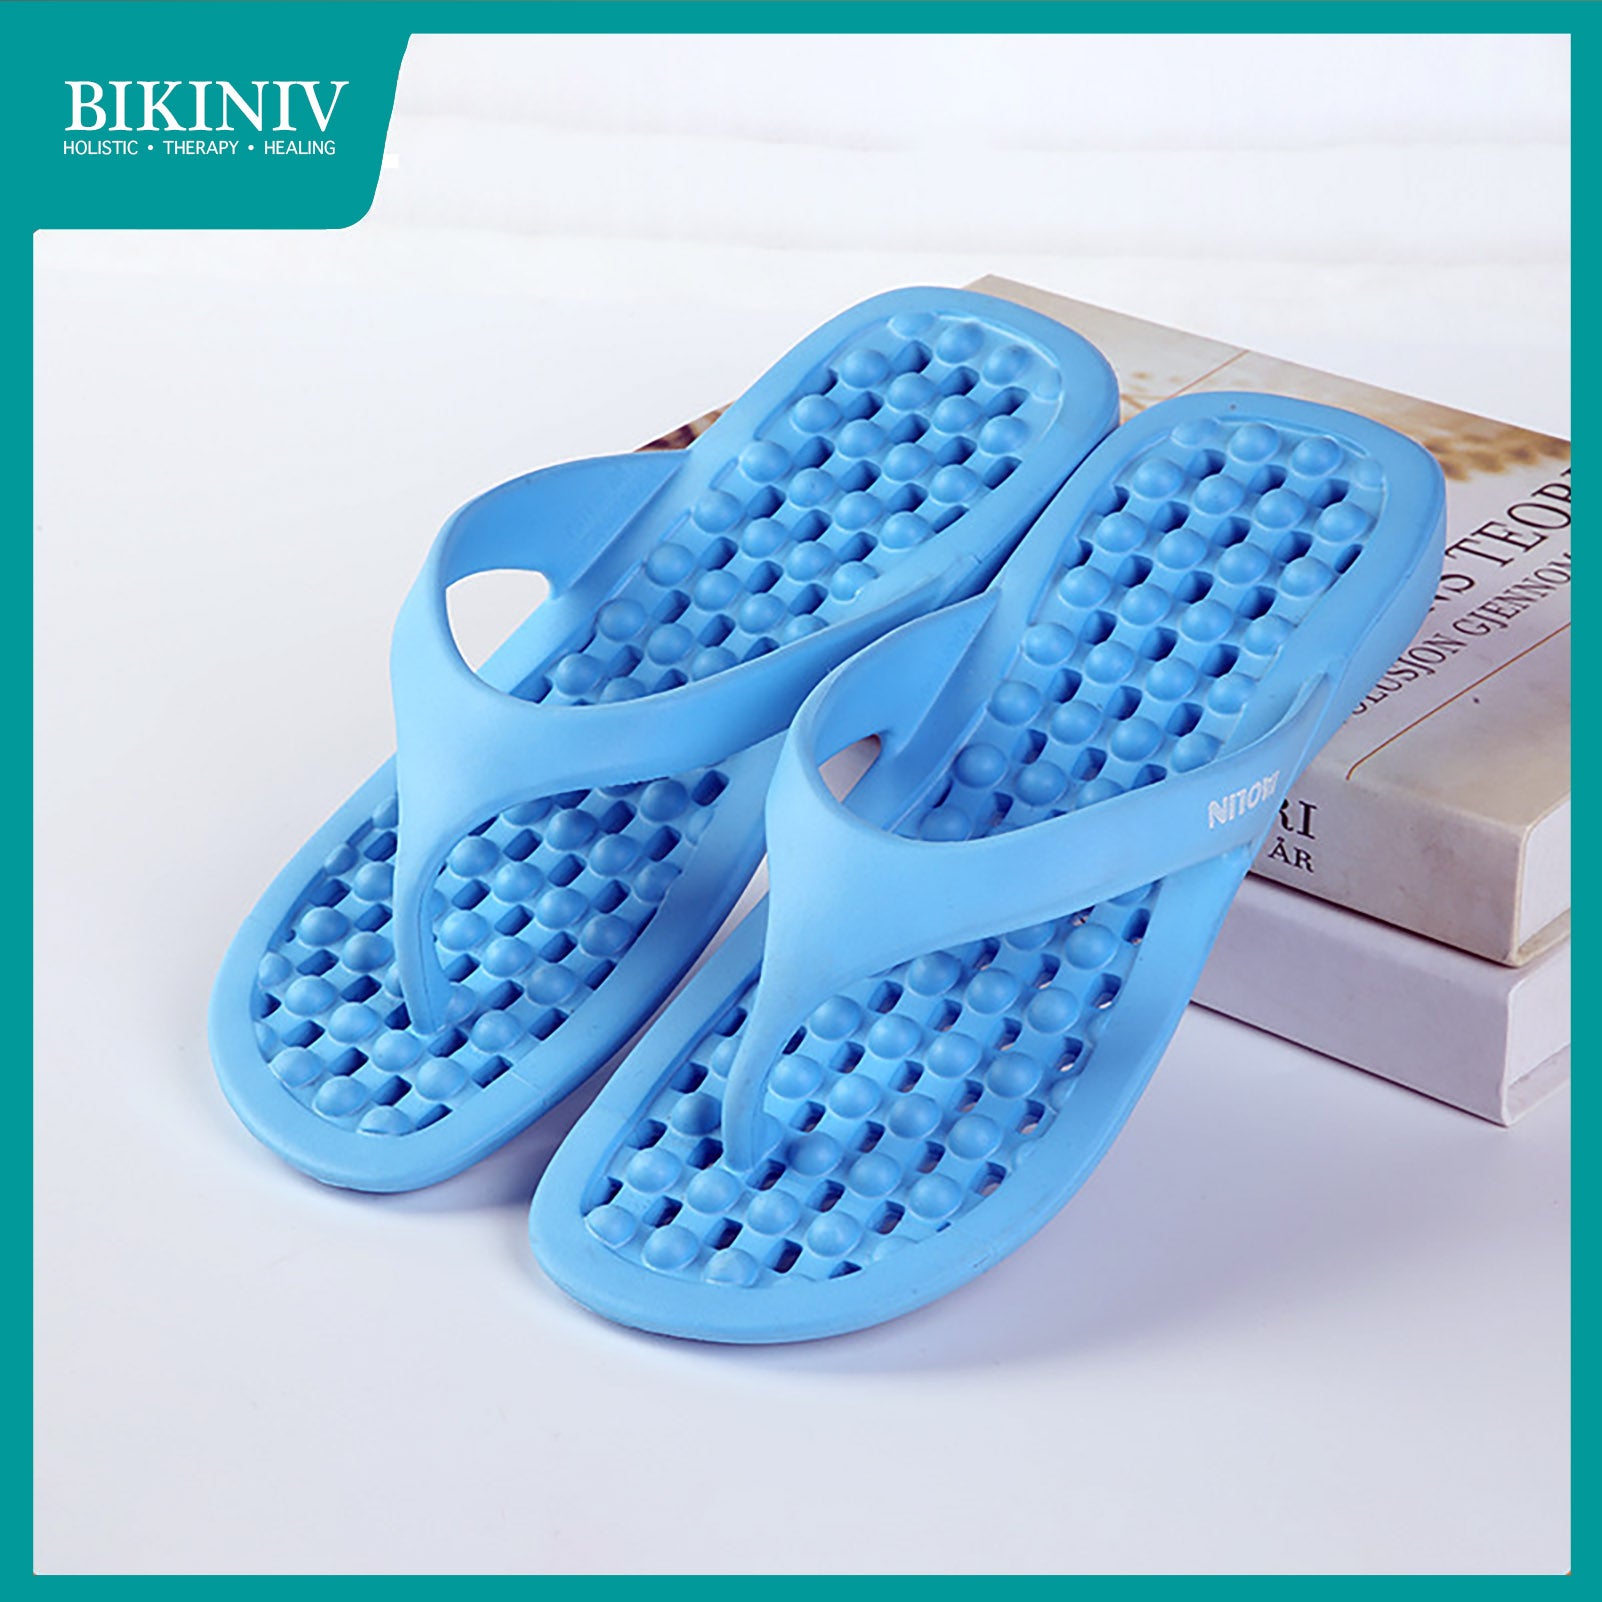 Massage shower quick dry slippers